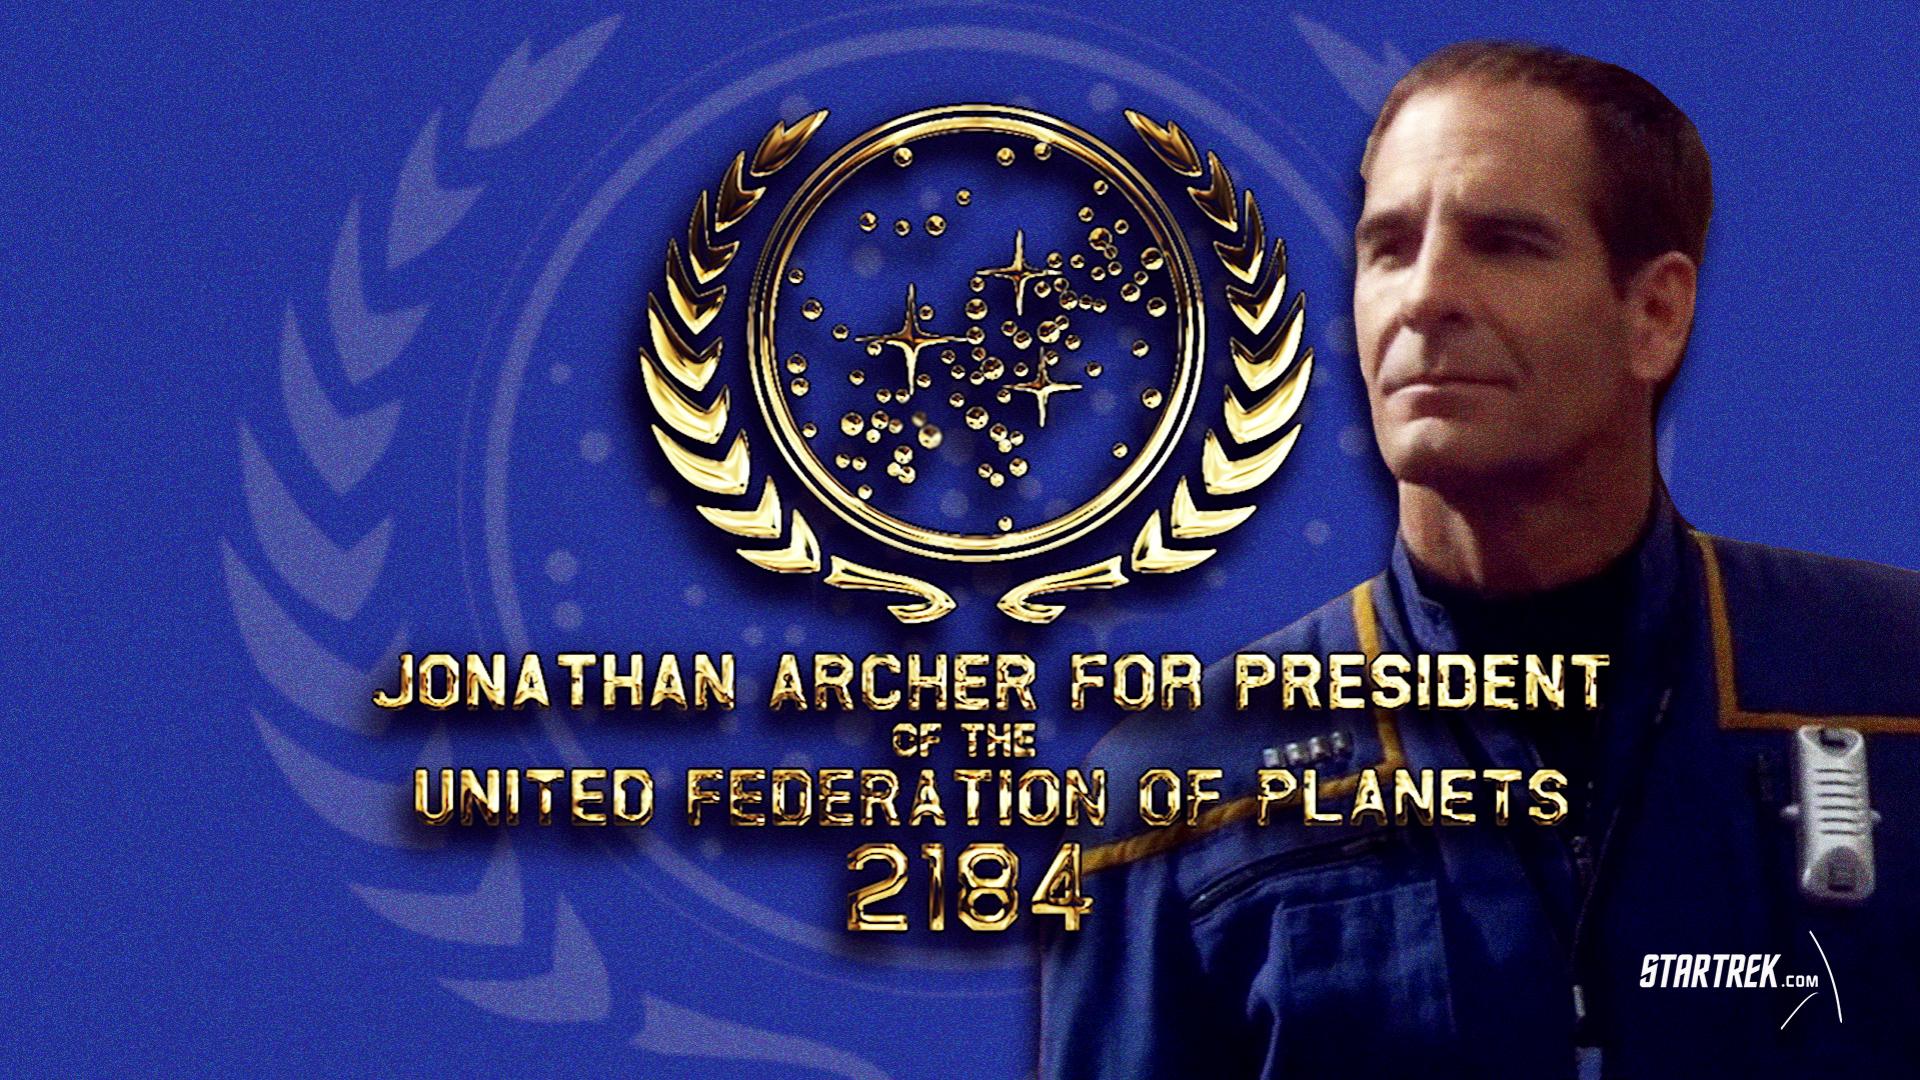 WATCH: The 2184 United Federation of Planets Presidential Nominee Jonathan Archer